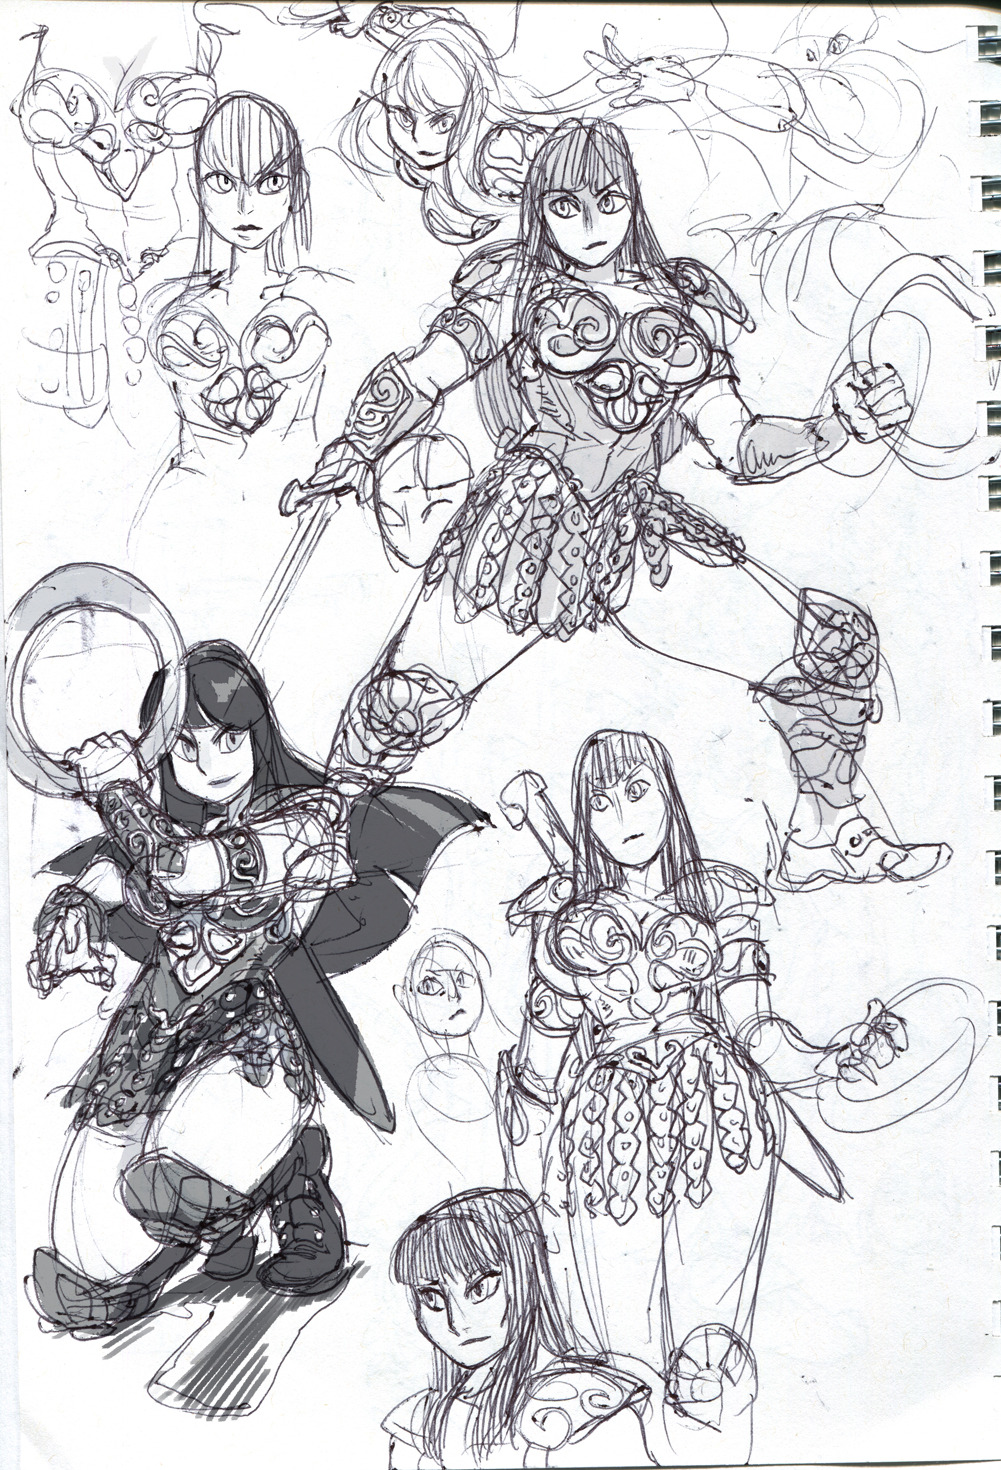 rudymora:  o-8:  Xena sketches and picture via Sketch Dailies. I spent too much time